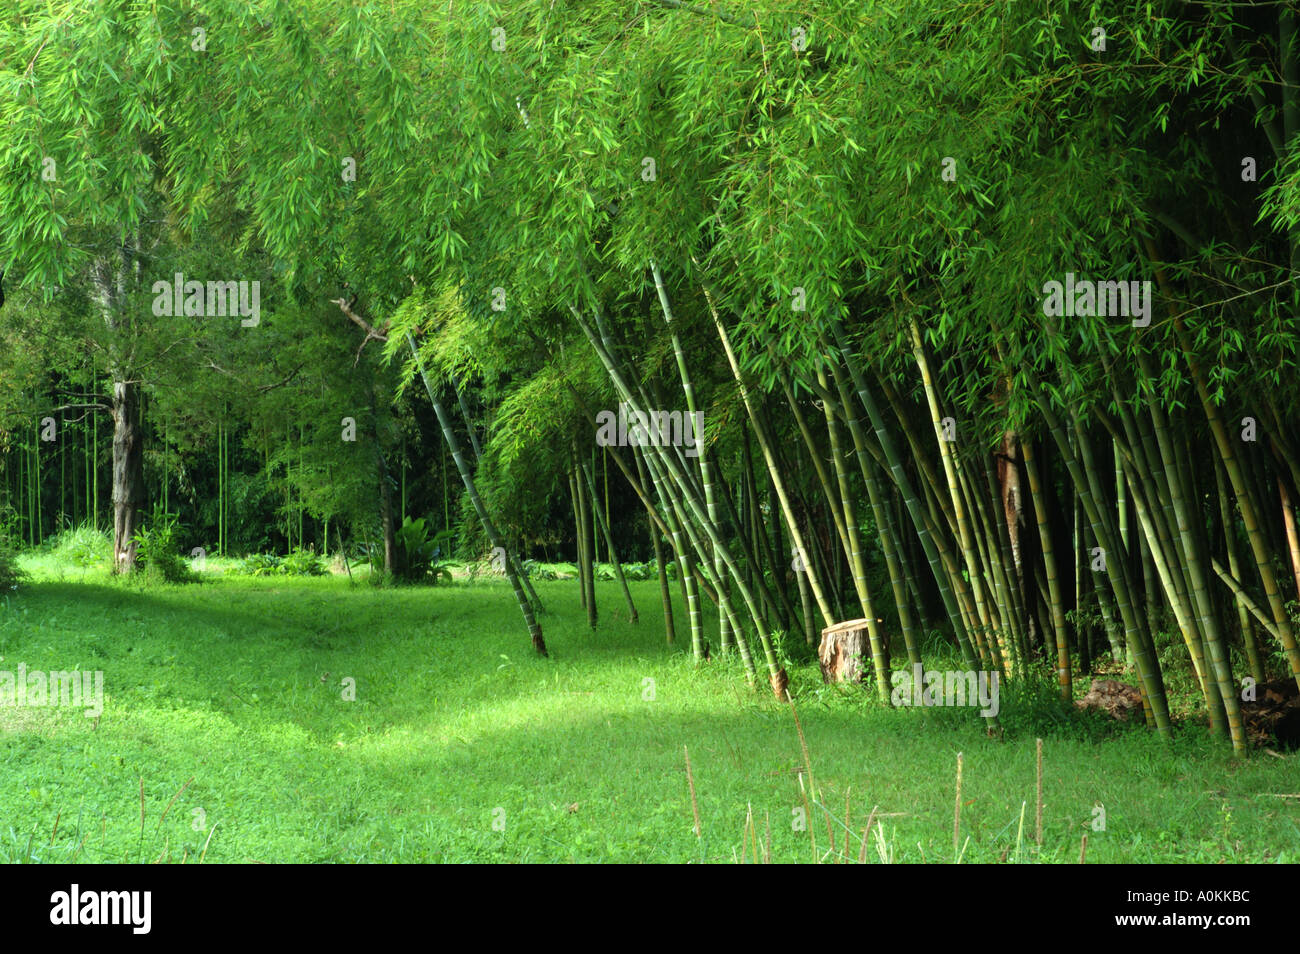 Moso Bamboo Scientific name Phyllostachys Pubescens growing in Queensland Australia dsc 9061 Stock Photo